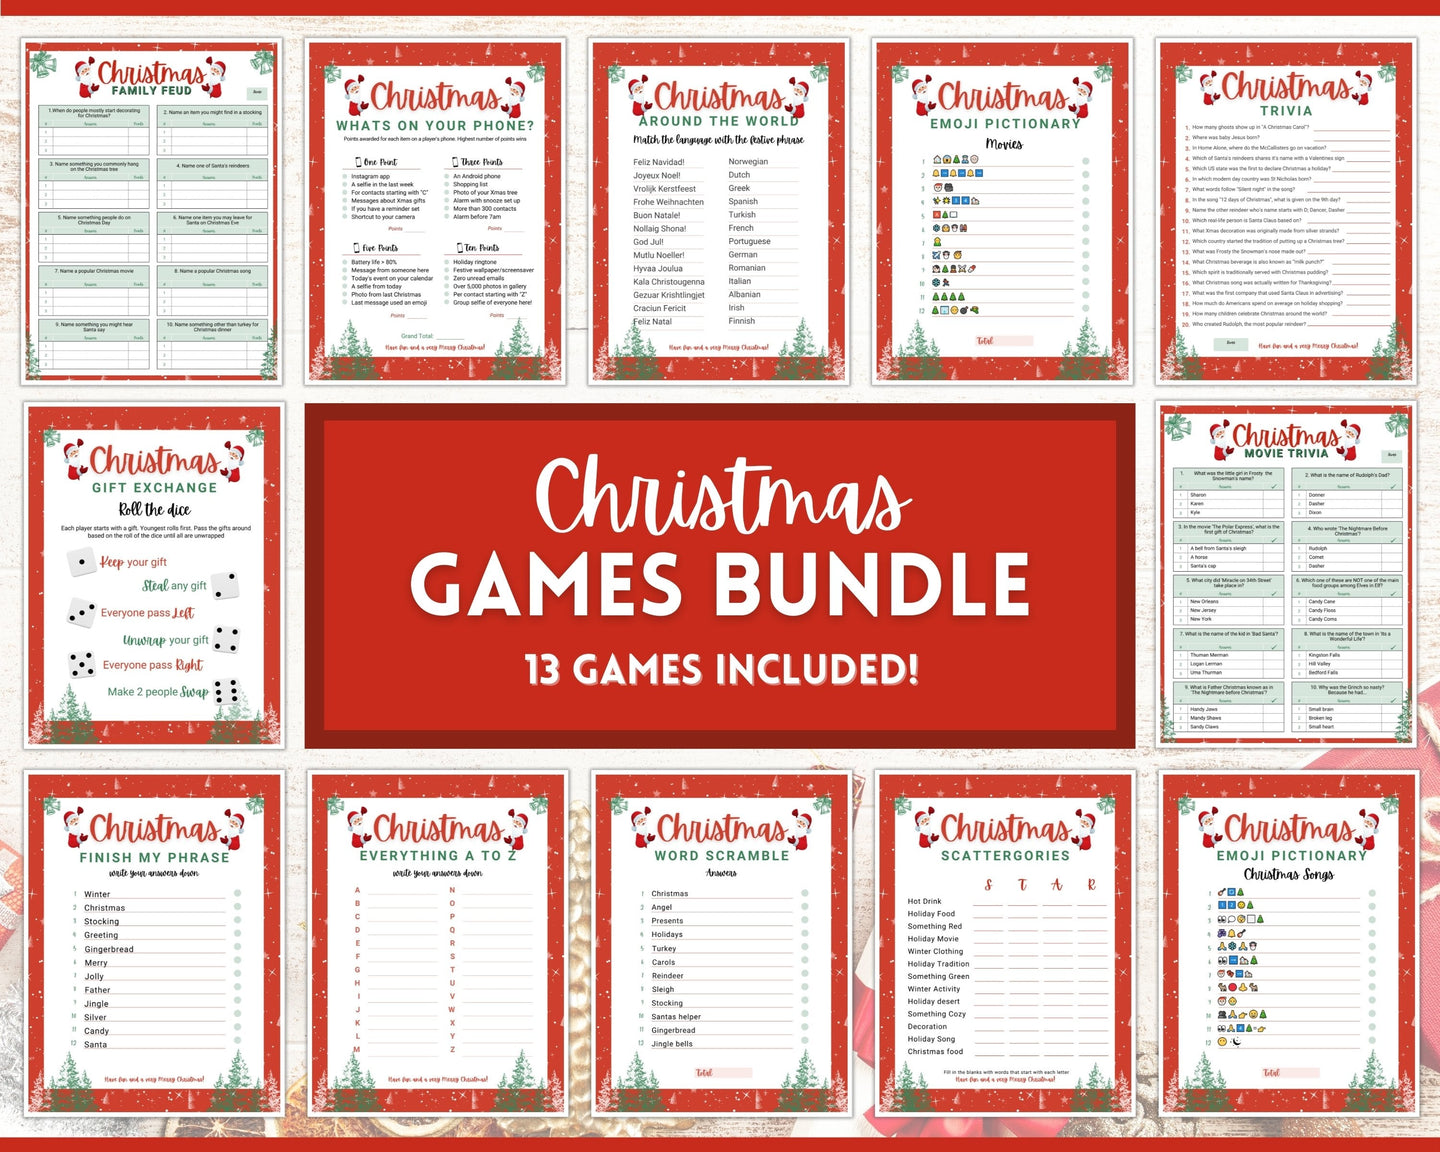 Holiday Party Games BUNDLE! 13 Christmas Game Printables! Fun Family Activity Set, Virtual Xmas, Kids & Adults, Office, Trivia, Guess, Feud